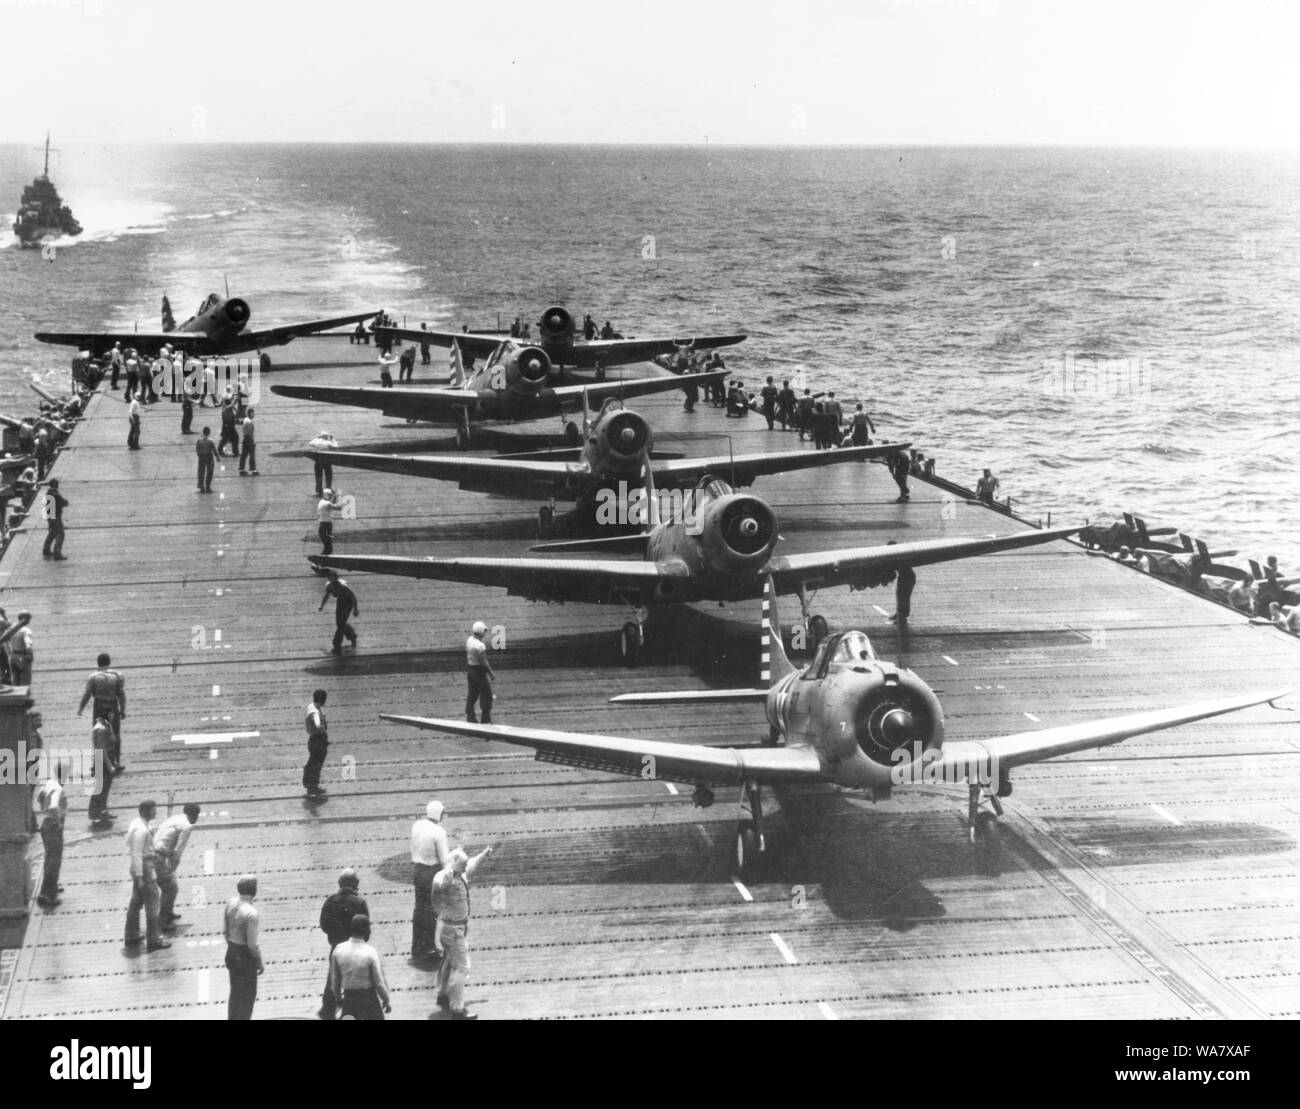 SBD Dauntless scout-bomber and five TBD-1 Devastator torpedo planes prepare to take-off from the USS Enterprise (CV-6) aircraft carrier during operations in the south Pacific area, 1942 Stock Photo